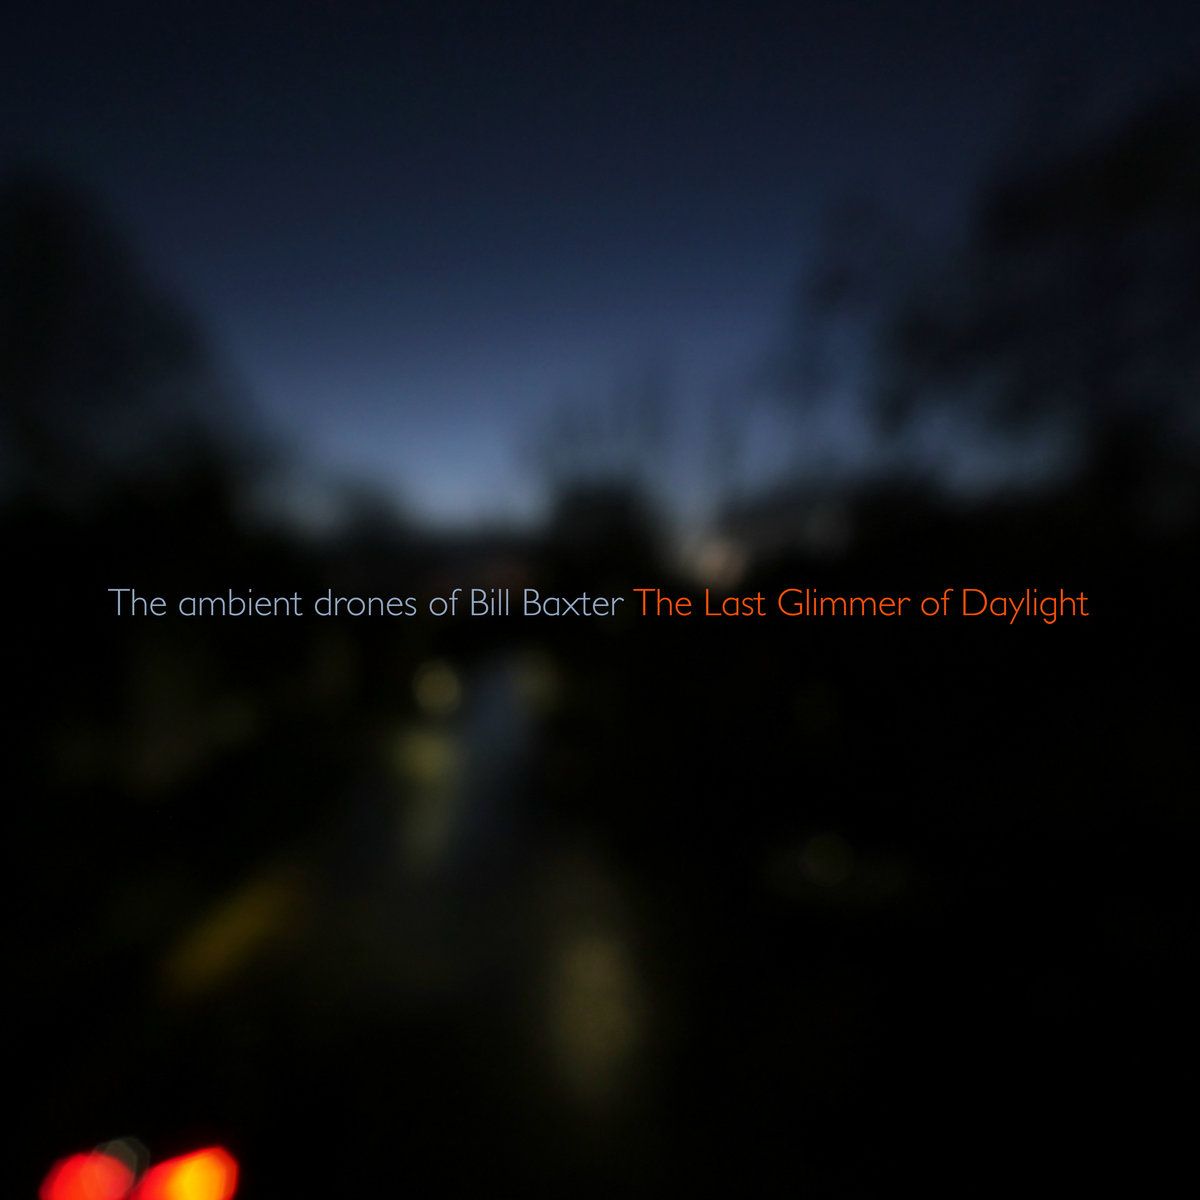 The Last Glimmer of Daylight (part 3). The ambient drones of Bill Baxter